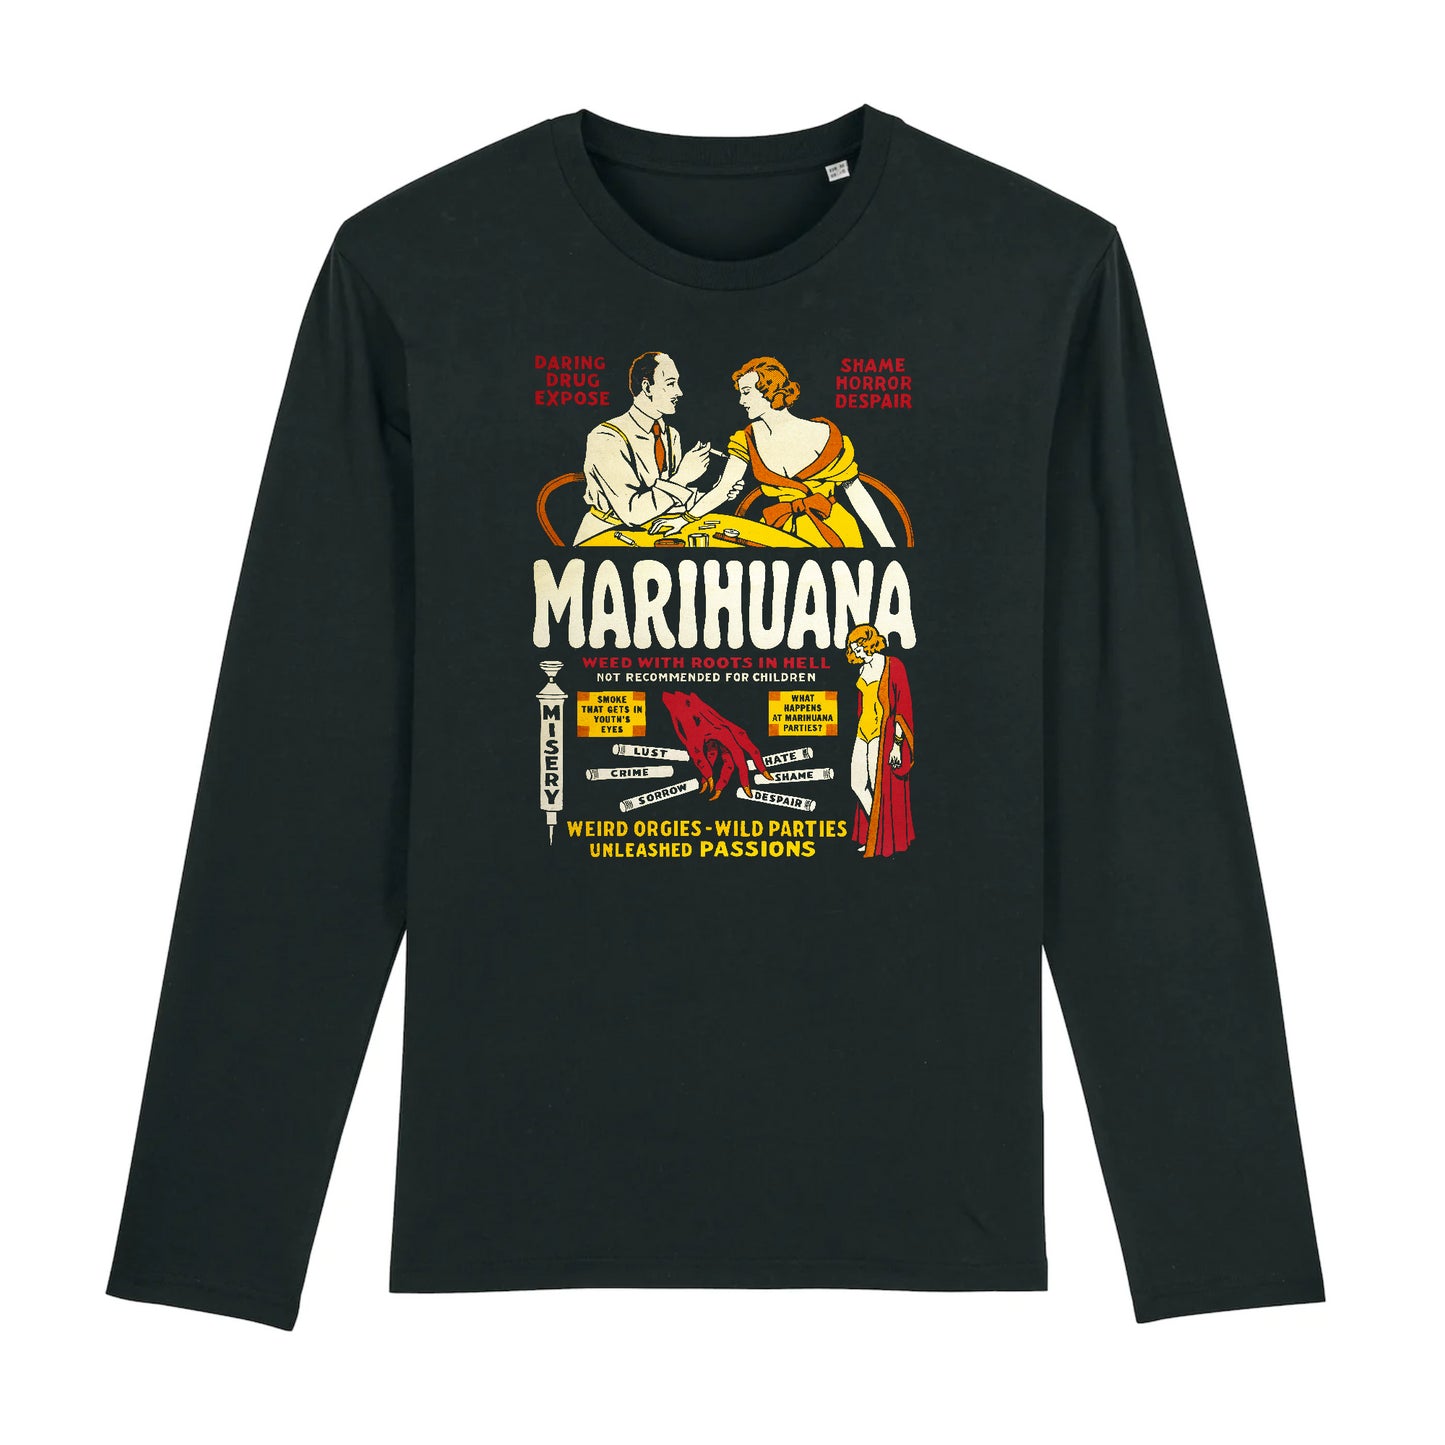 Marihuana, Weed With Roots In Hell Roadshow Attractions, 1935 - T-shirt à manches longues